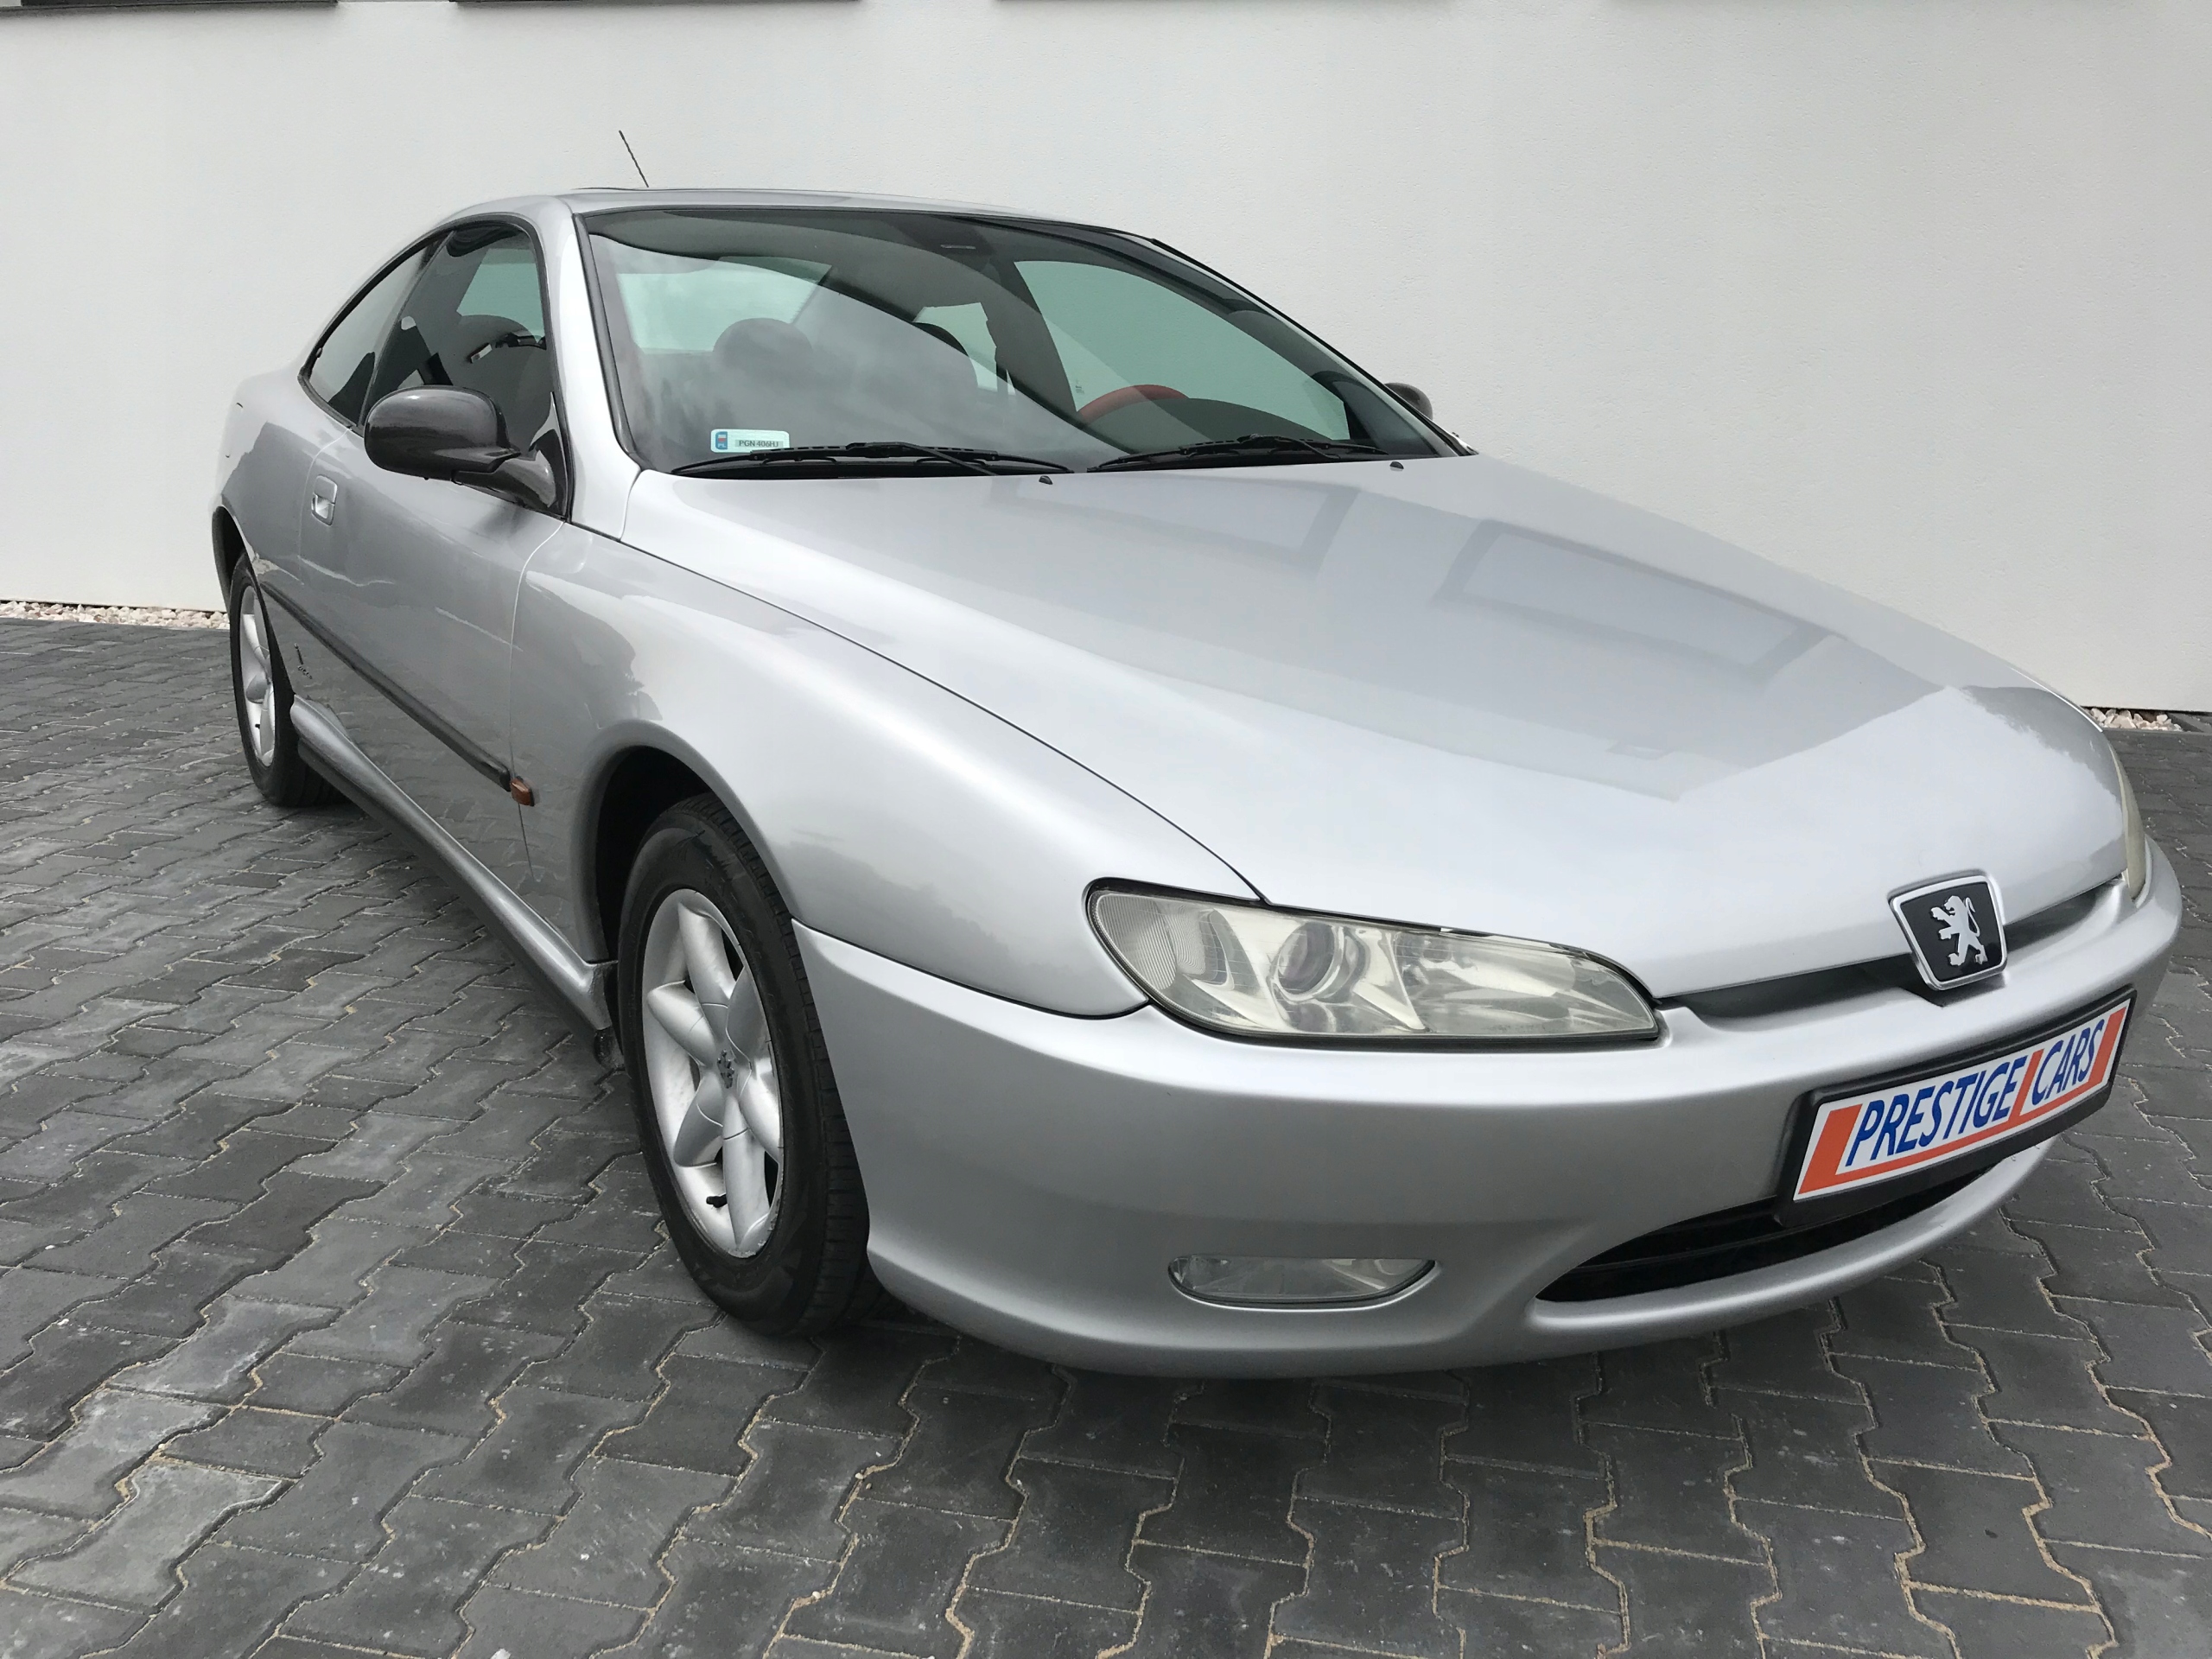 PEUGEOT 406 COUPE 2.0i 16V ** SPECIAL EDITION